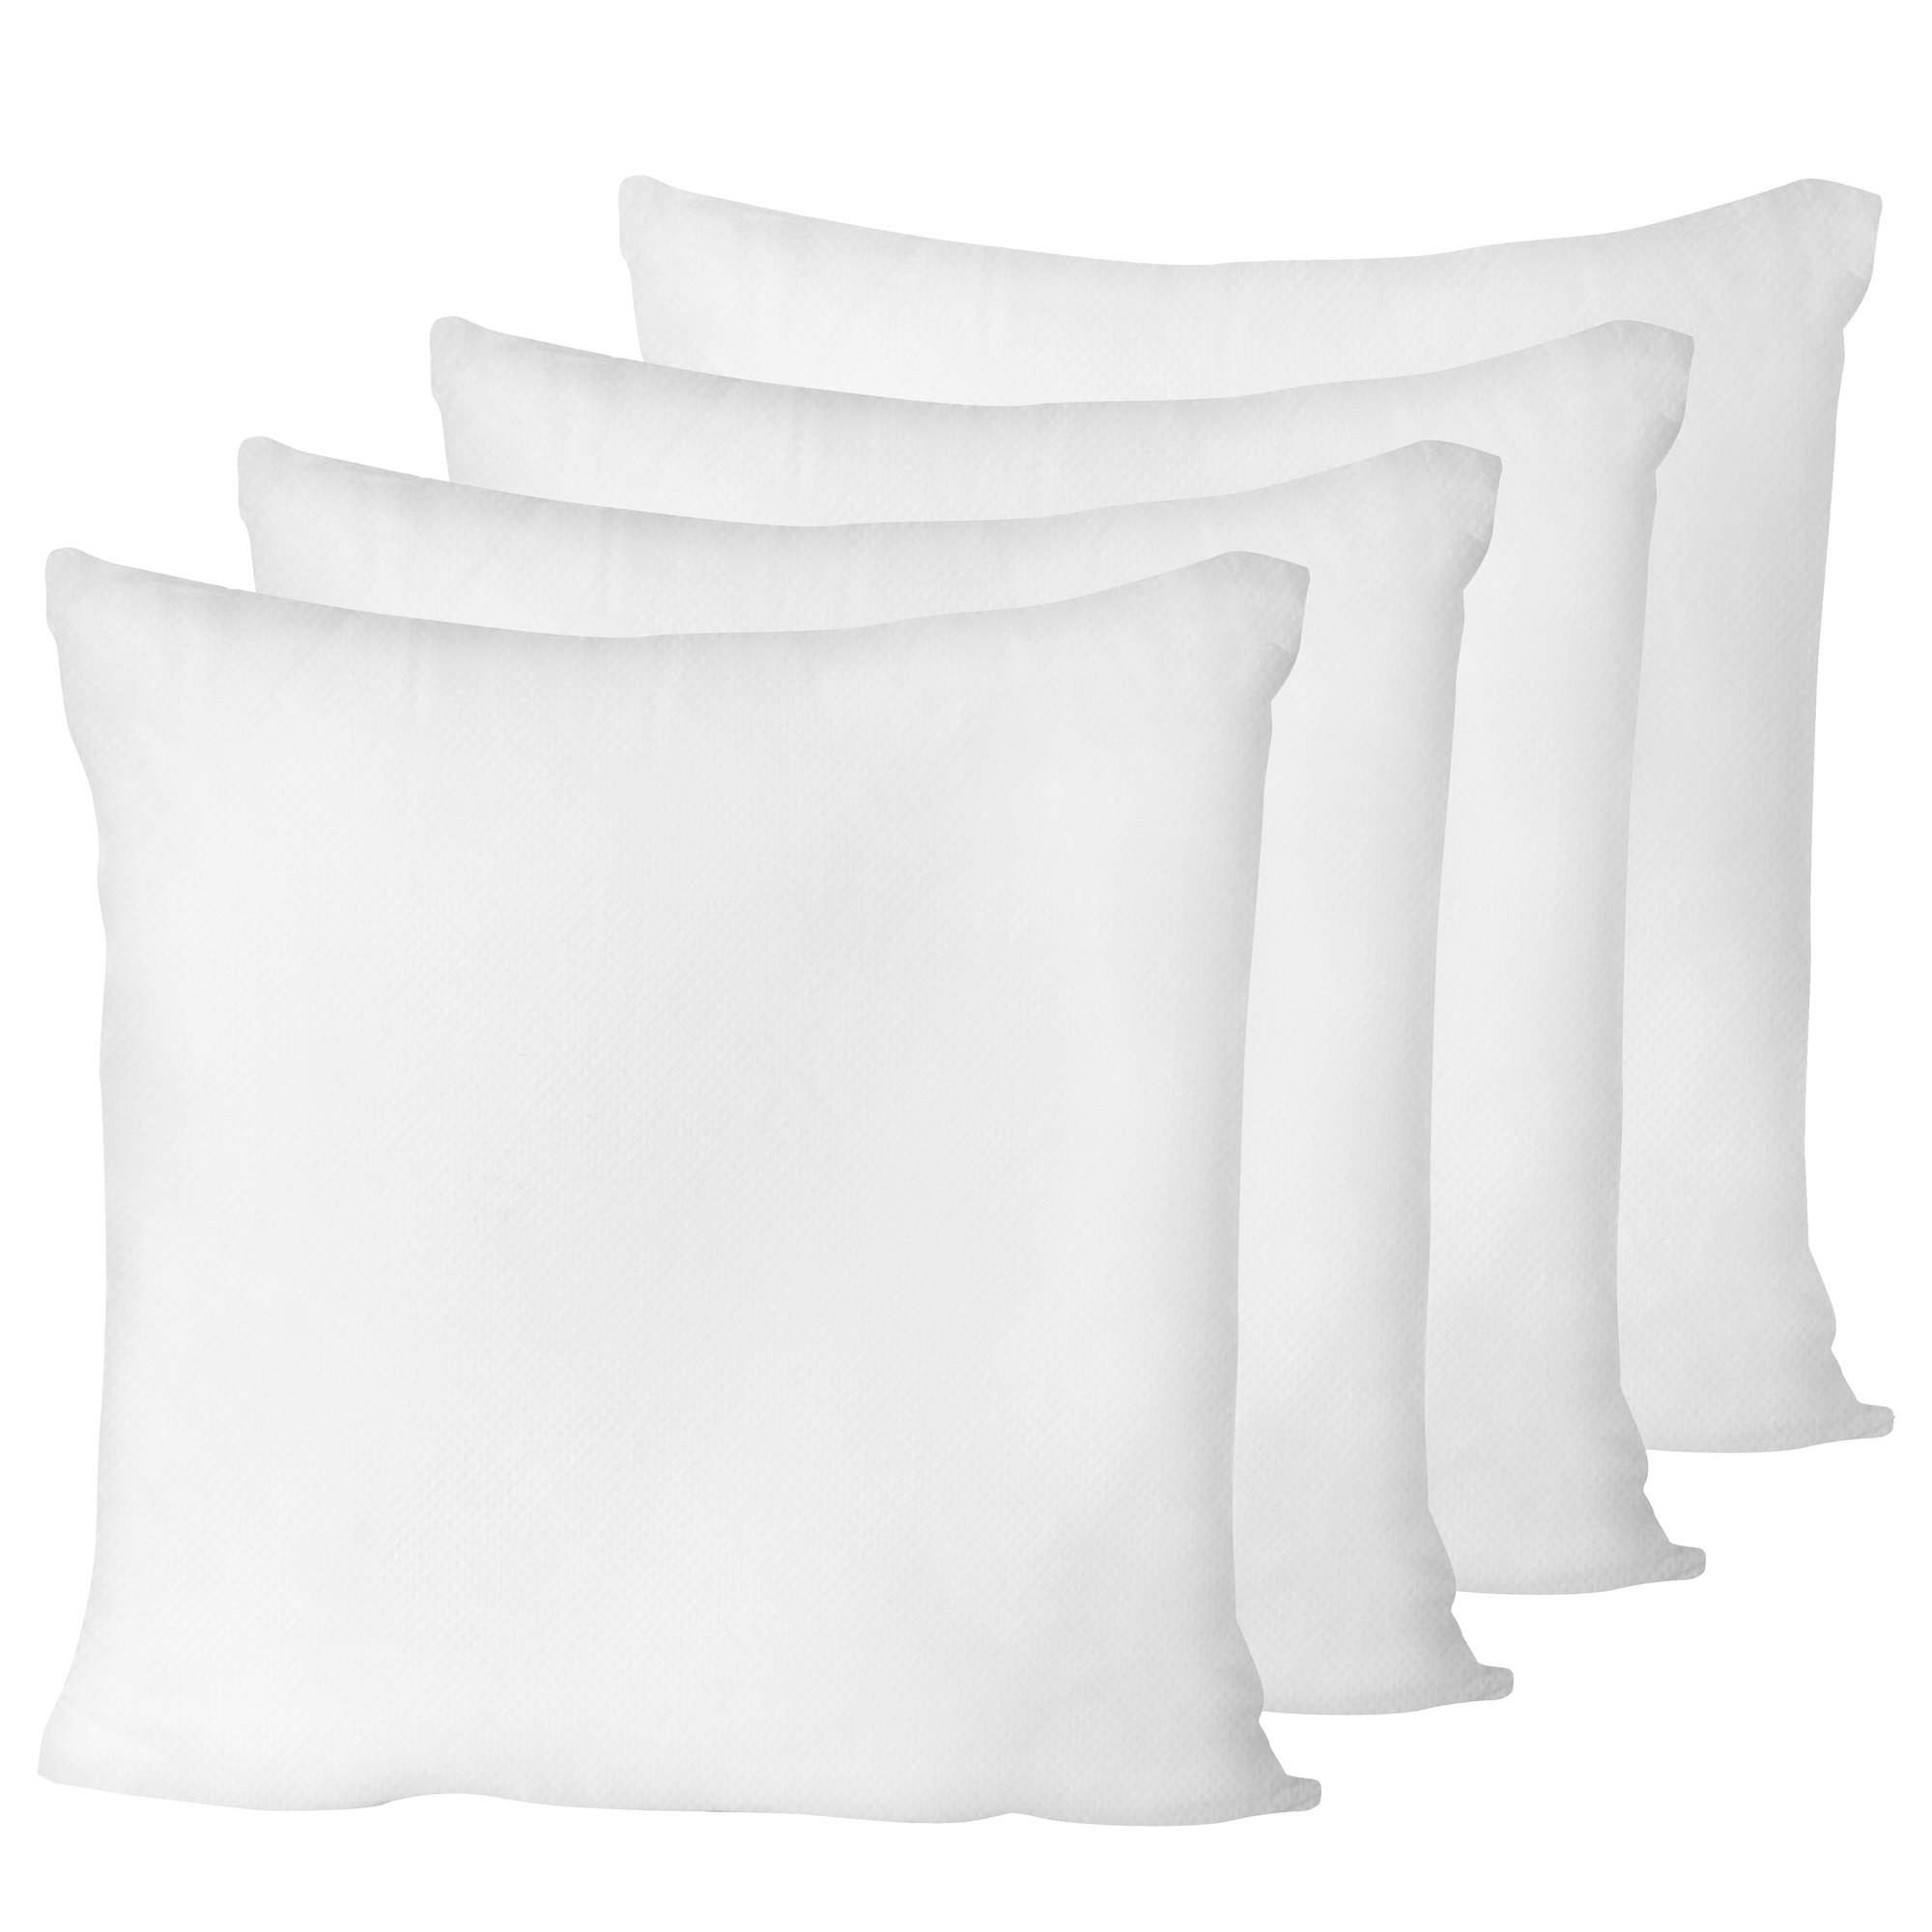 Arsuite Carly Pillow Insert & Reviews